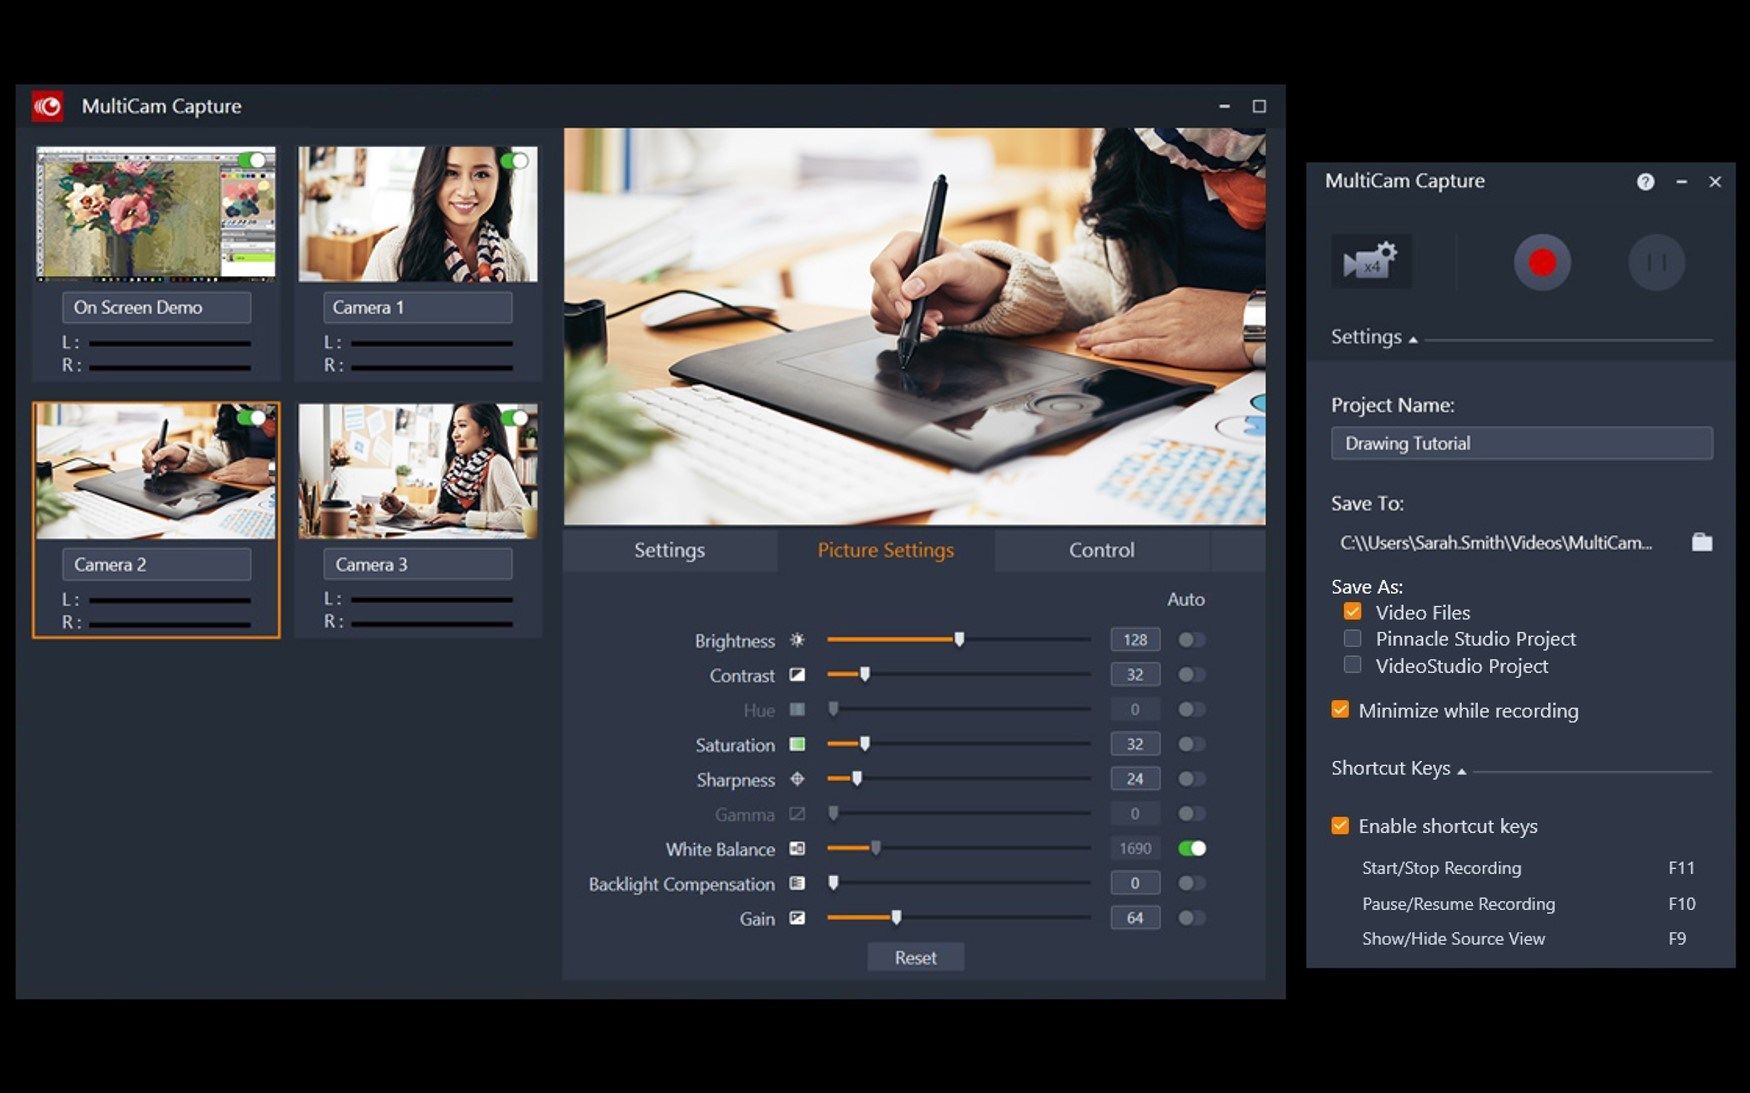 MultiCam Capture User interface - stream all connected camera feeds, and capture video from multiple devices at the click of a button.